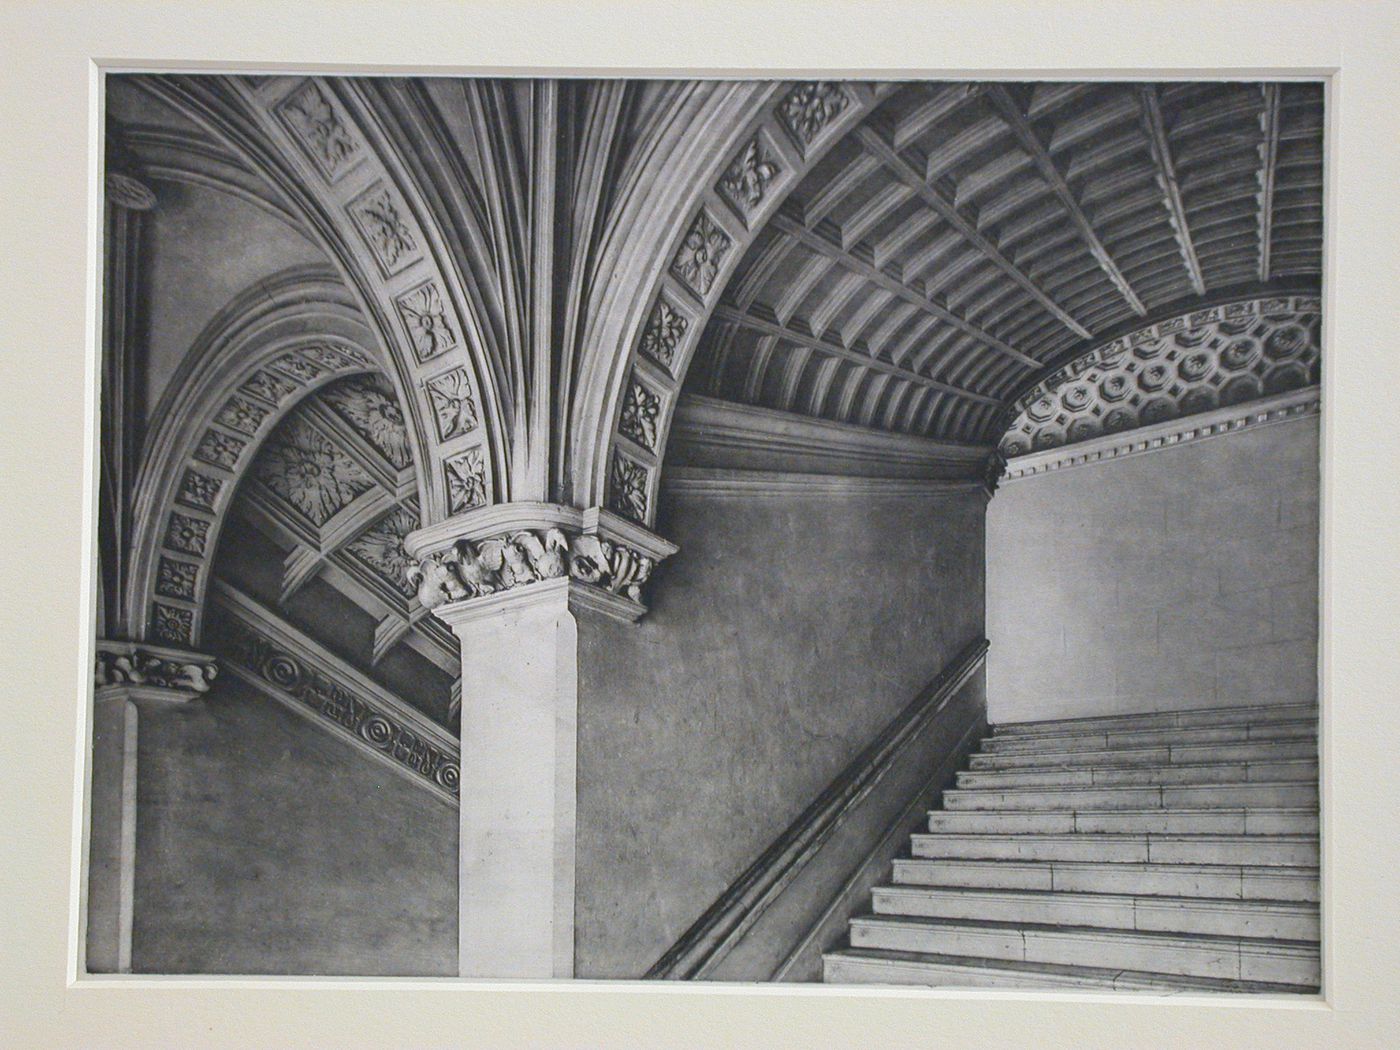 Detail of stairs, particularly vaulted ceilings, Château de Pau, Pau, France